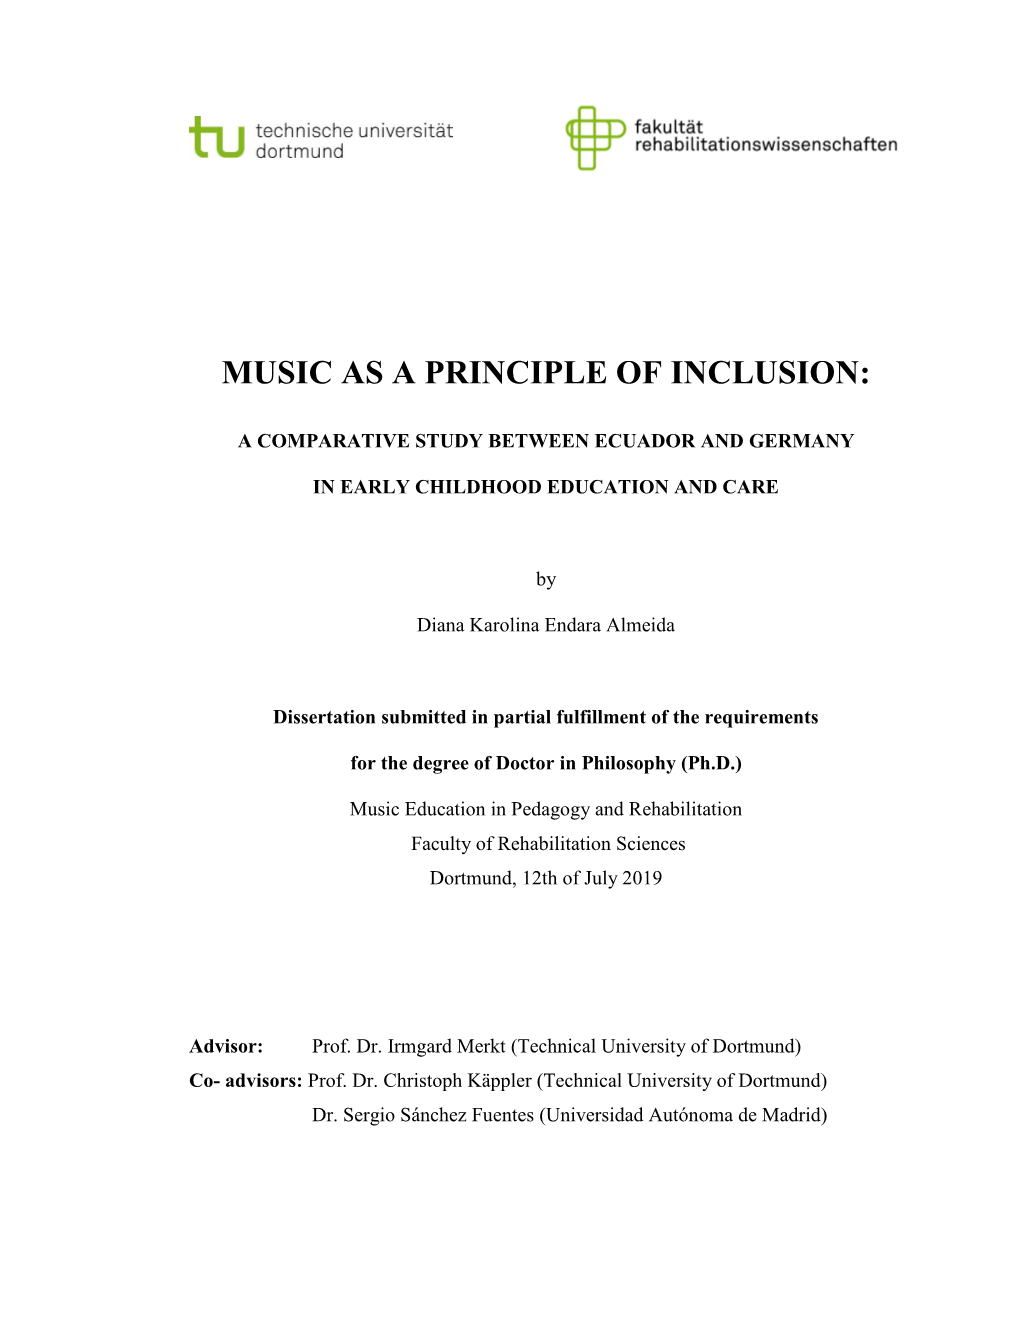 Music As a Principle of Inclusion